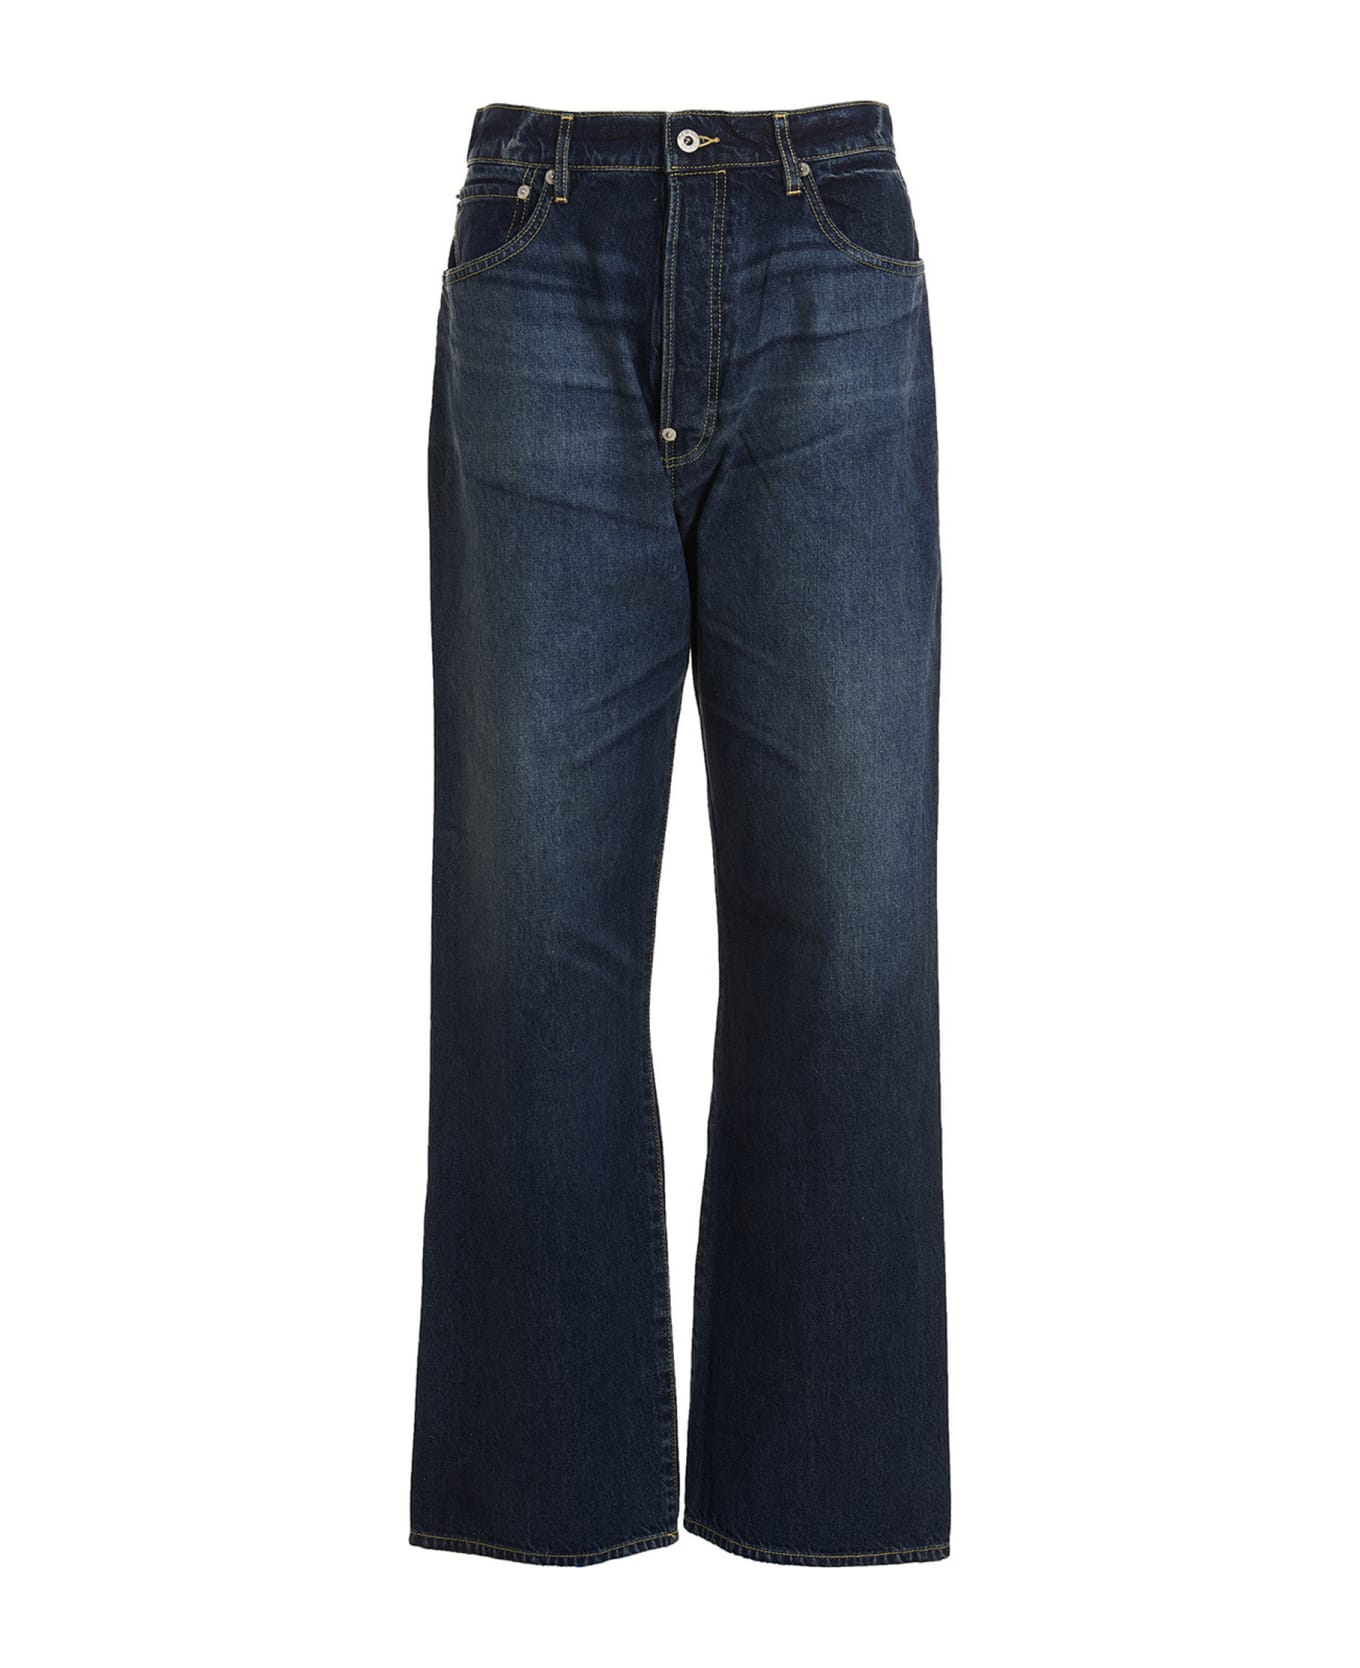 Kenzo Relaxed Fit Jeans - BLUE